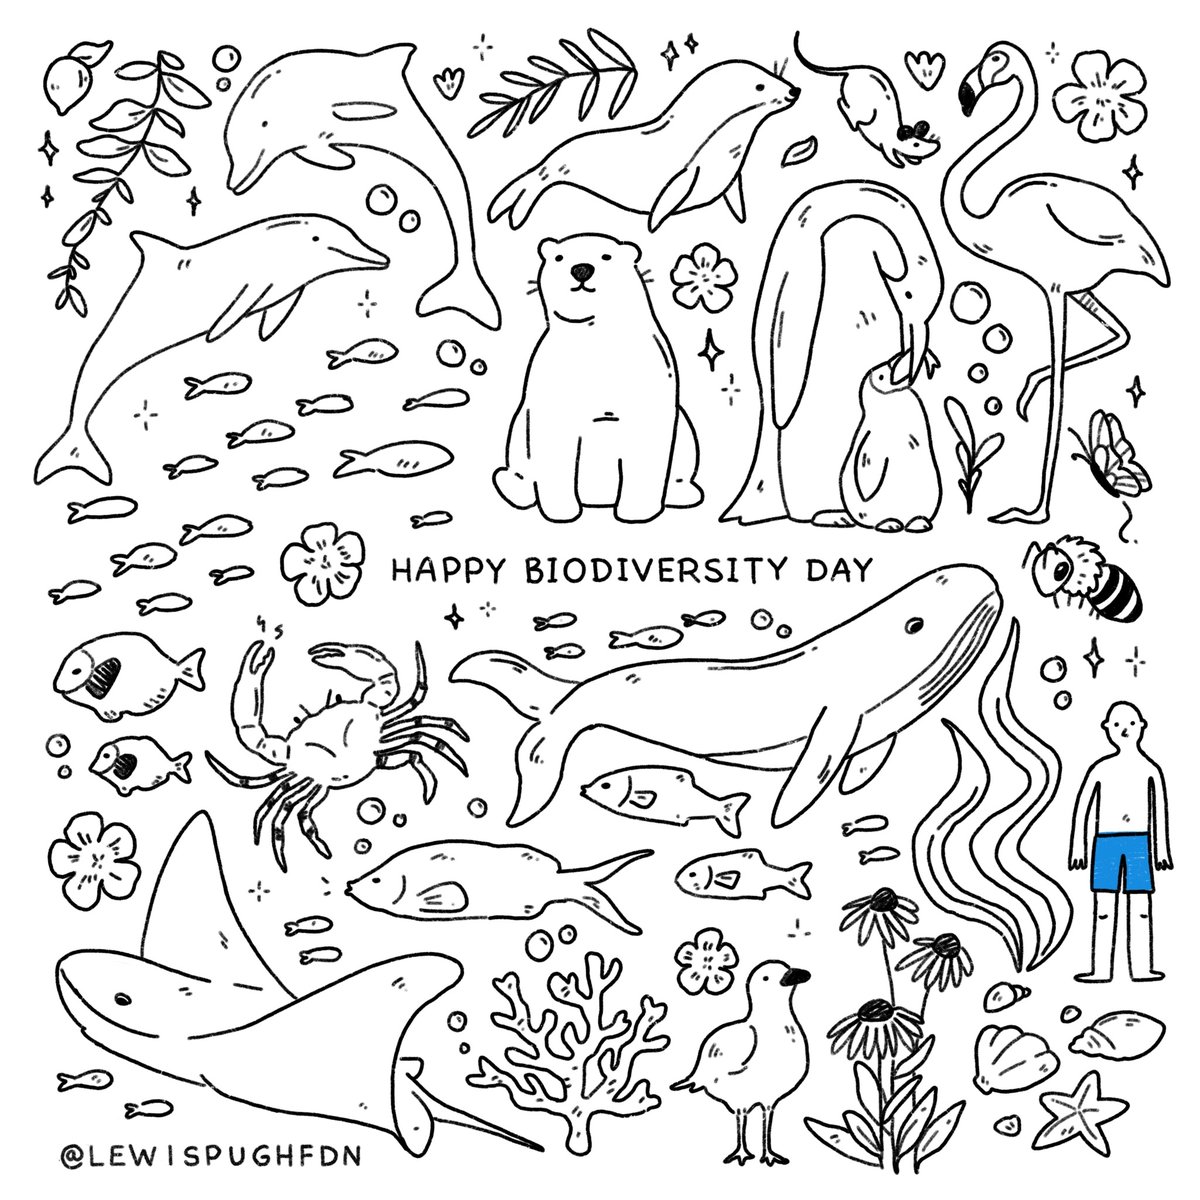 On #BiodiversityDay, it's time to face the facts: we're a small part of a big picture. Let's start acting like it 🌿🐠🦋